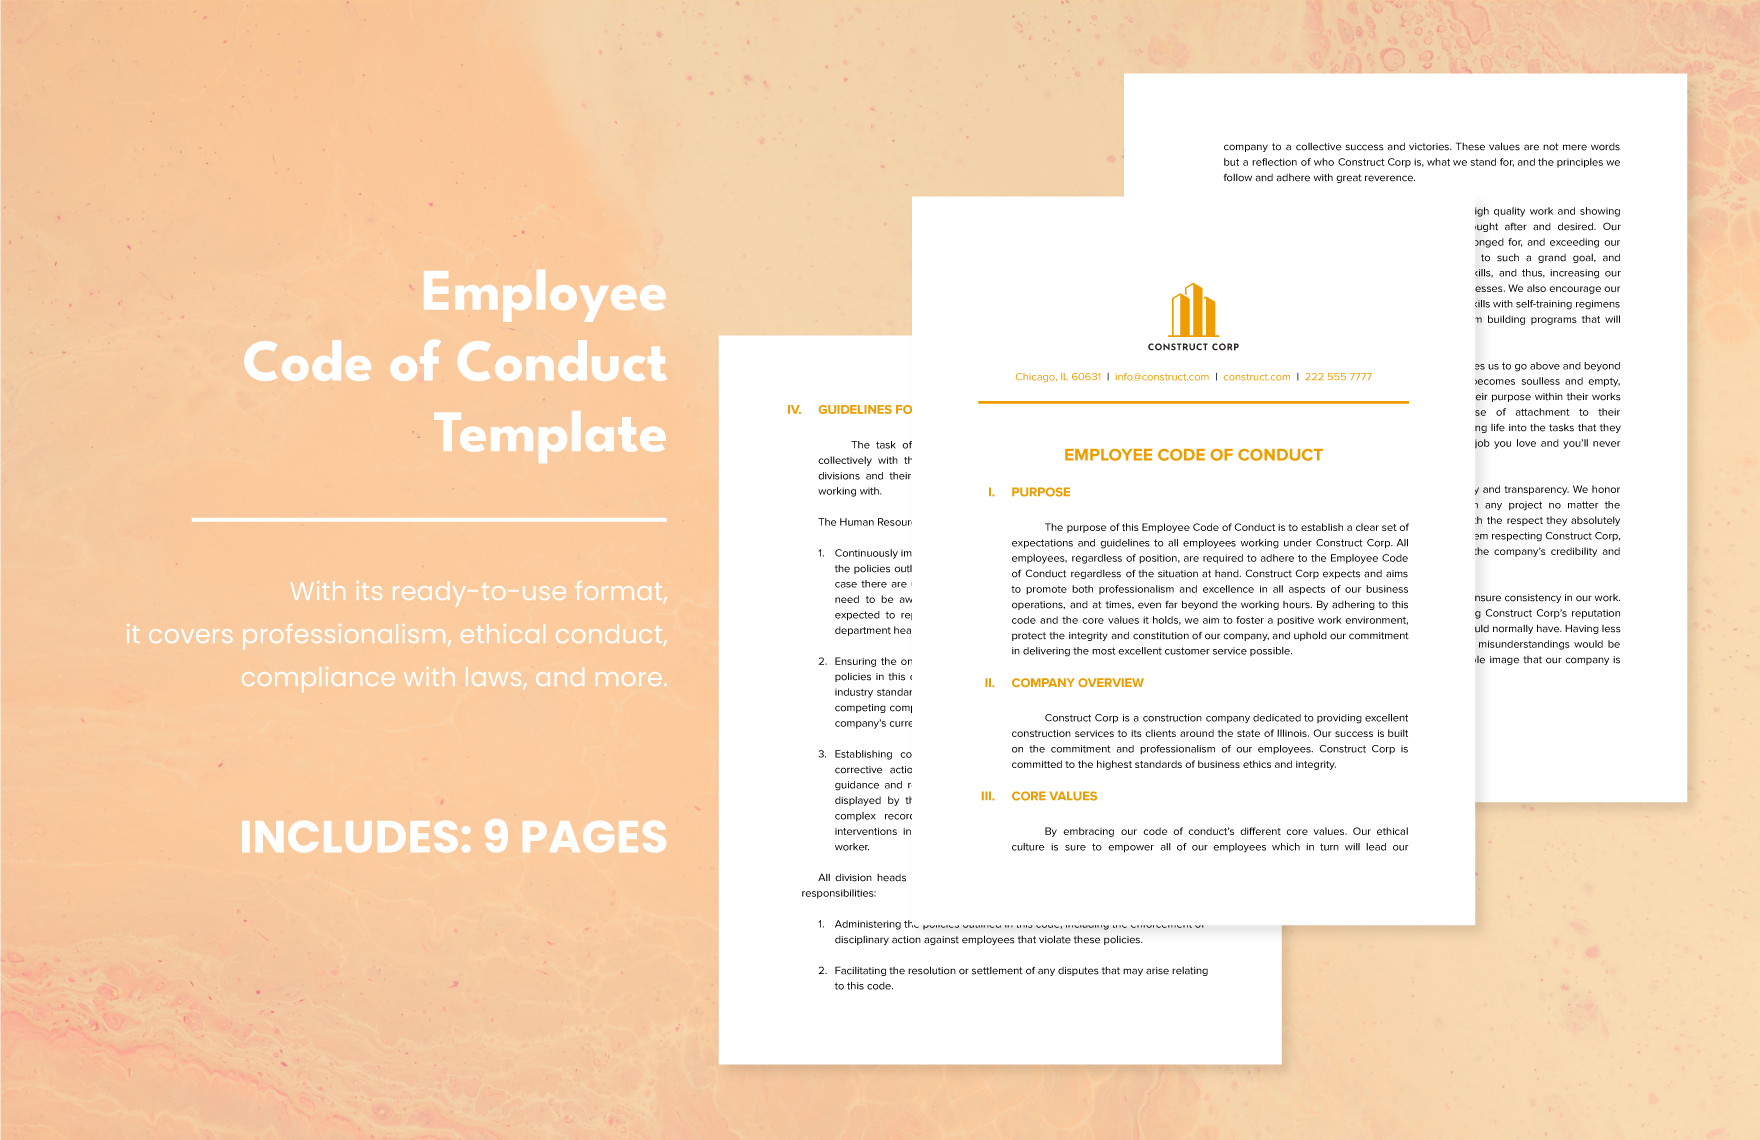 Employee Code of Conduct Template in Word